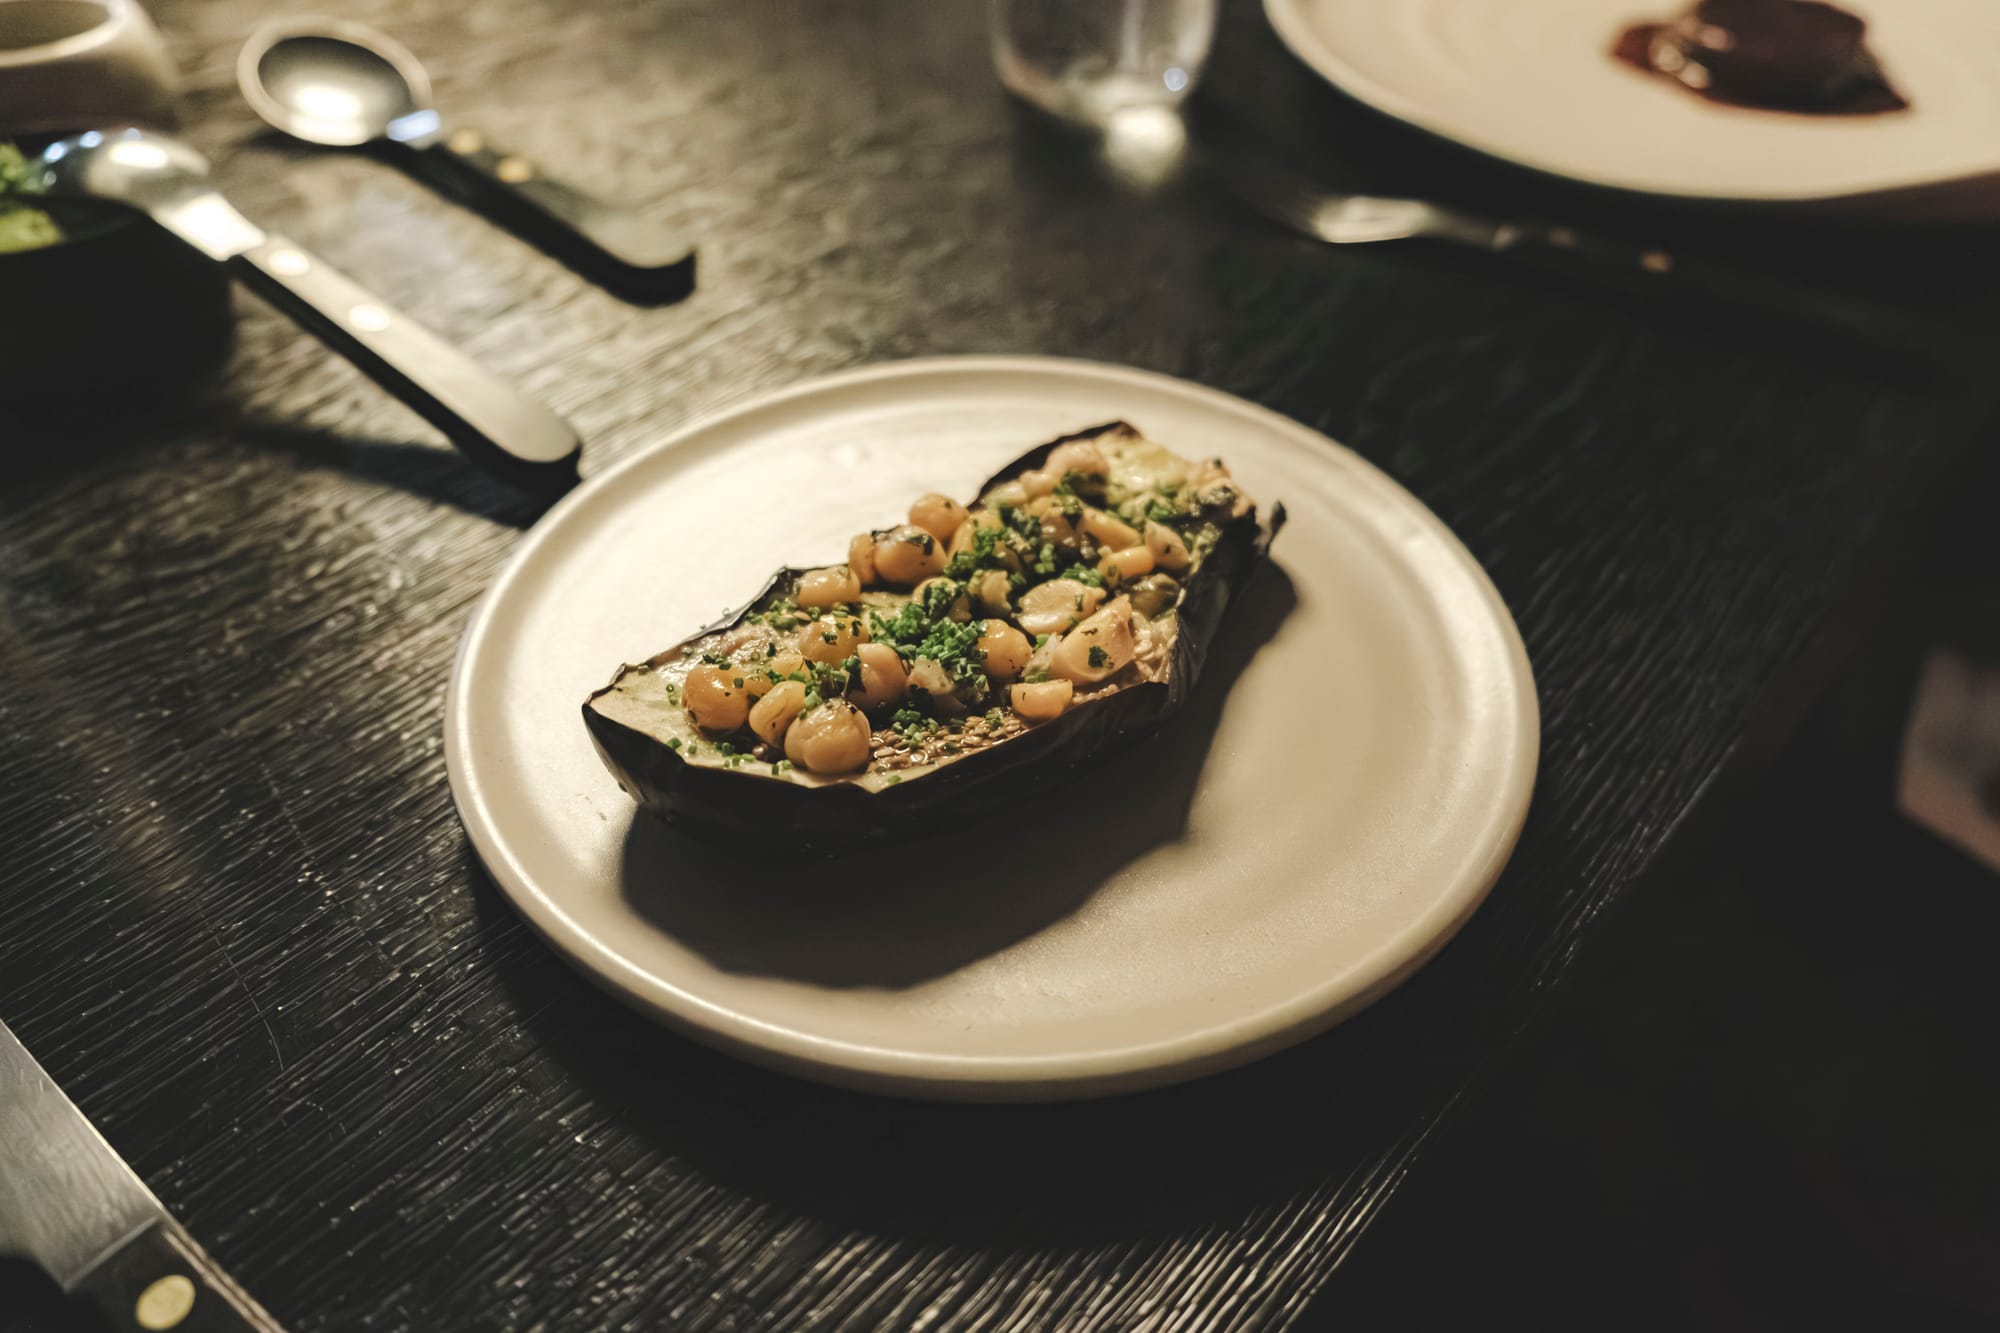 Pujol [REVIEW] – The $3,495 MXN Tasting Menu Experience of Mexico City